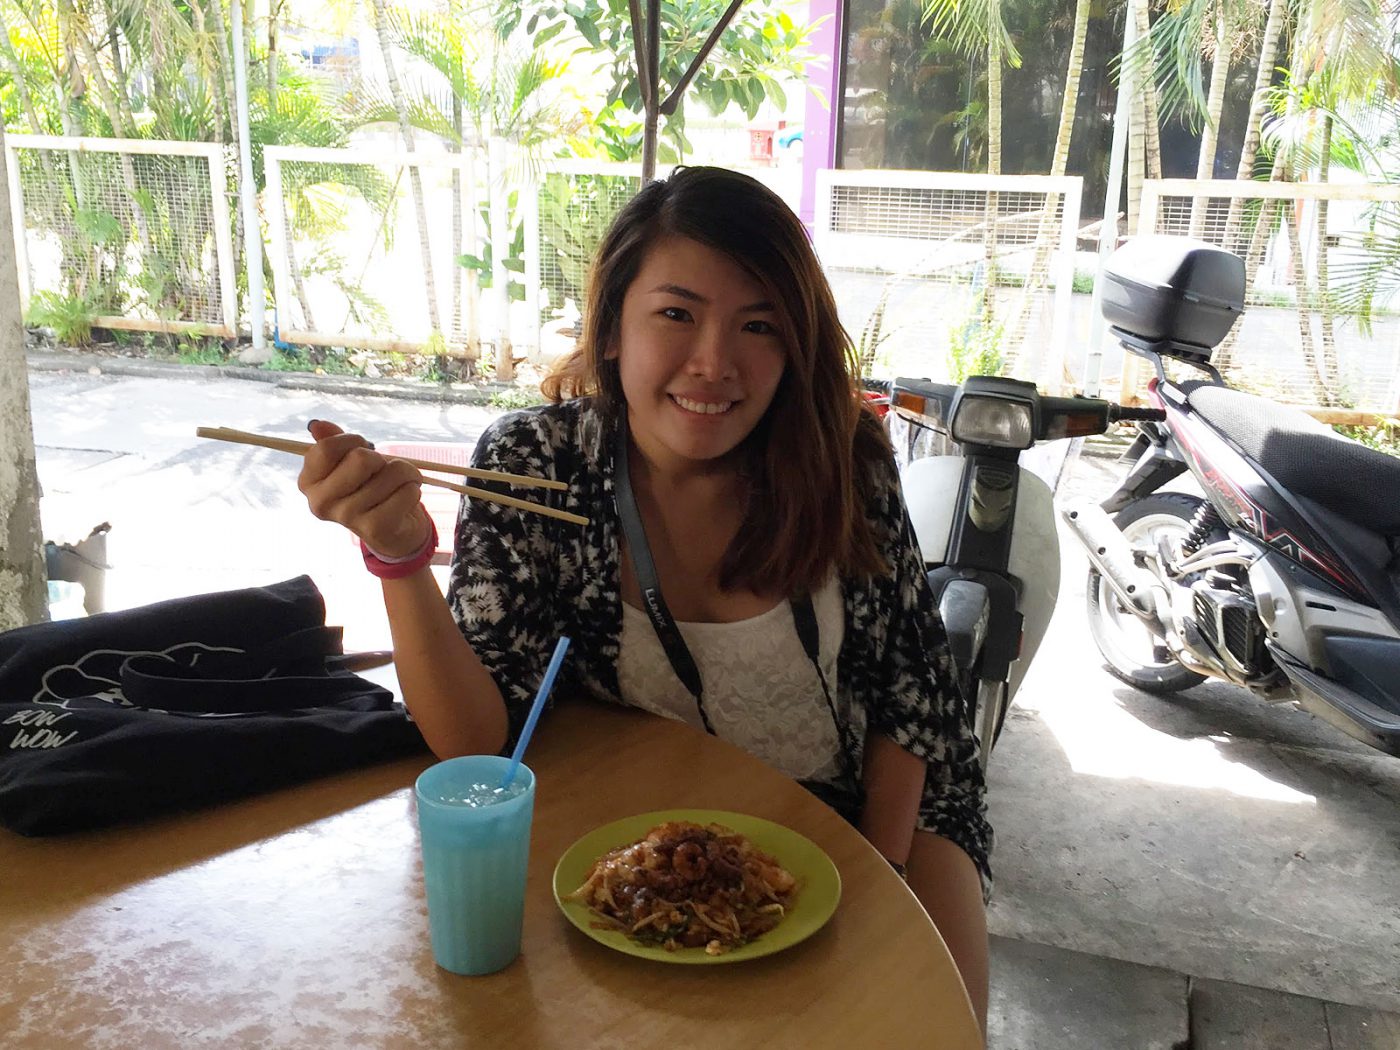 Happily tucking in to the Char Koay Teow